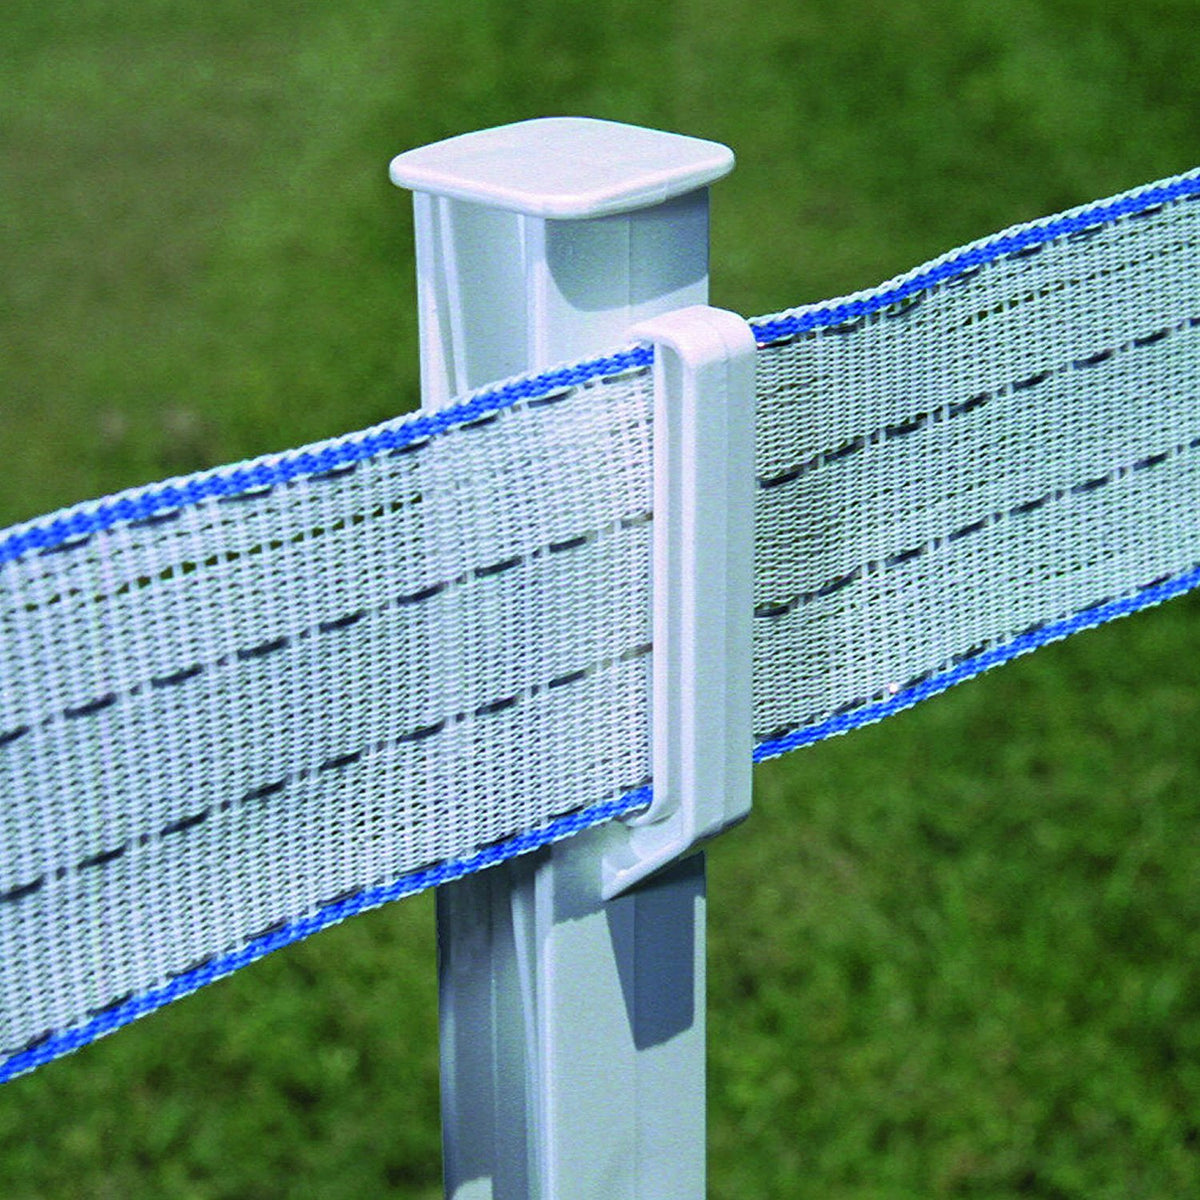 Fi-Shock A-48 Step-In Fence Post, 4'